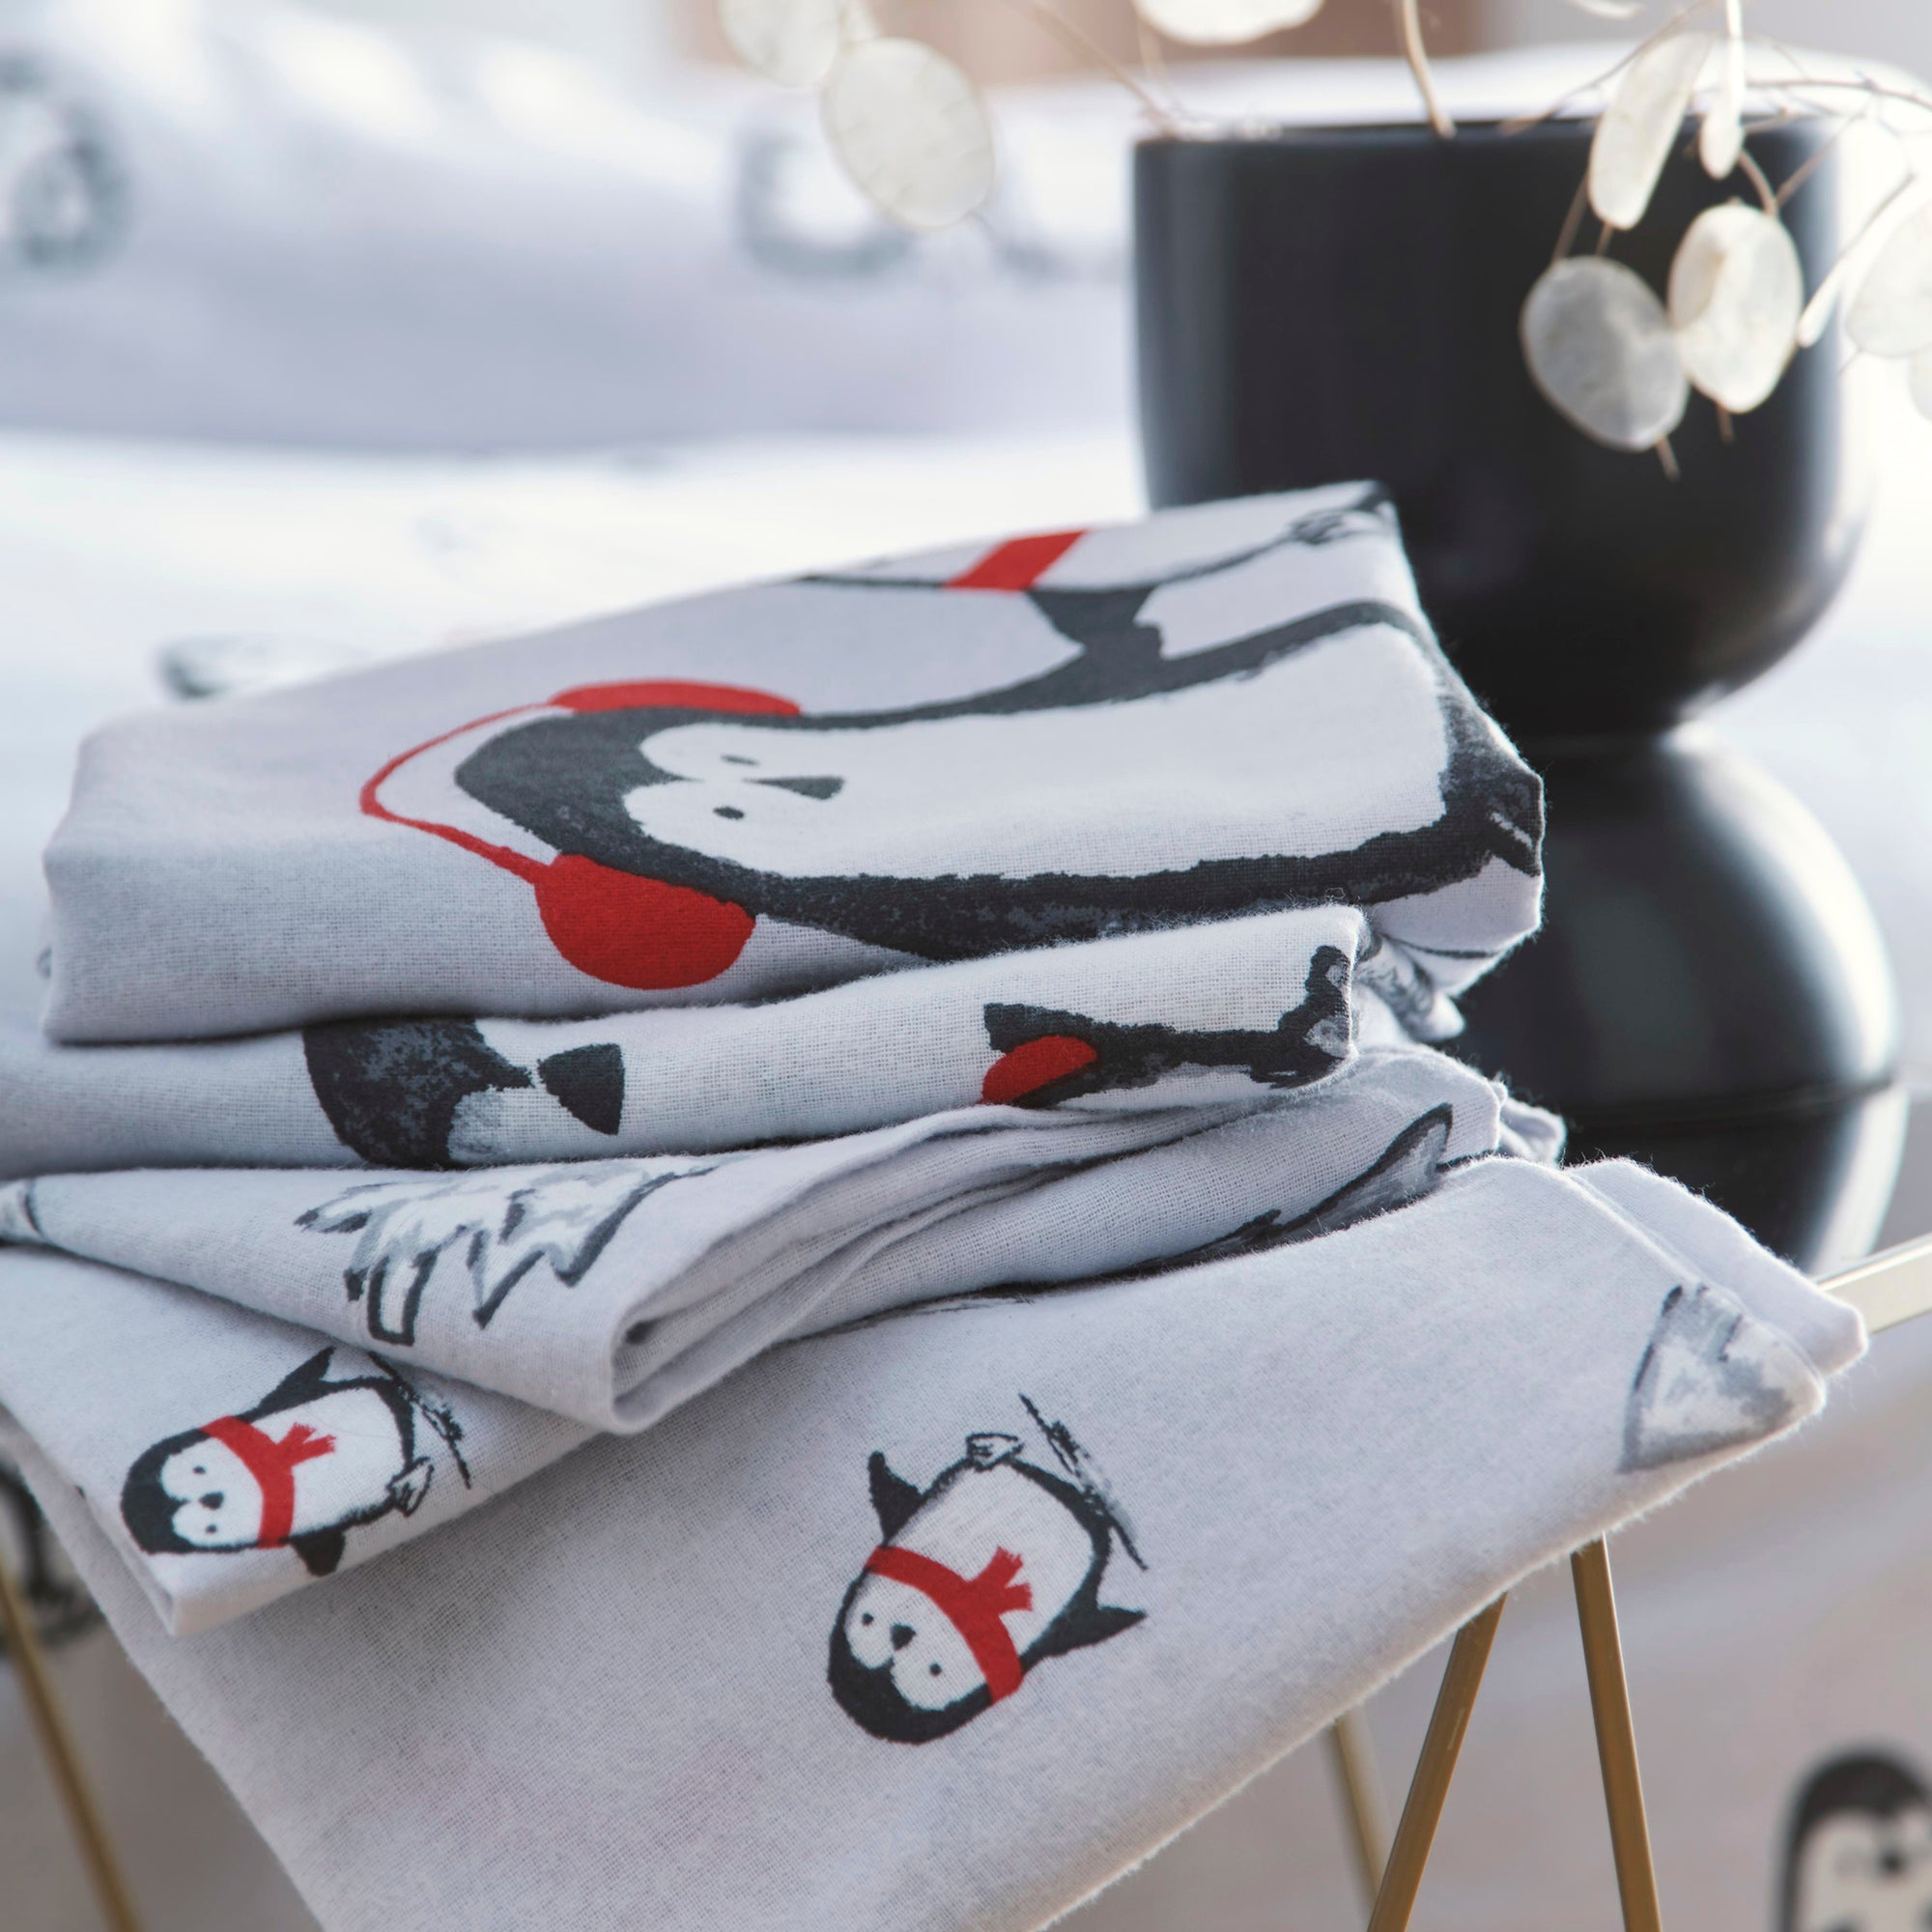 Snowy Penguin - Christmas Duvet Cover Set - By Fusion Christmas